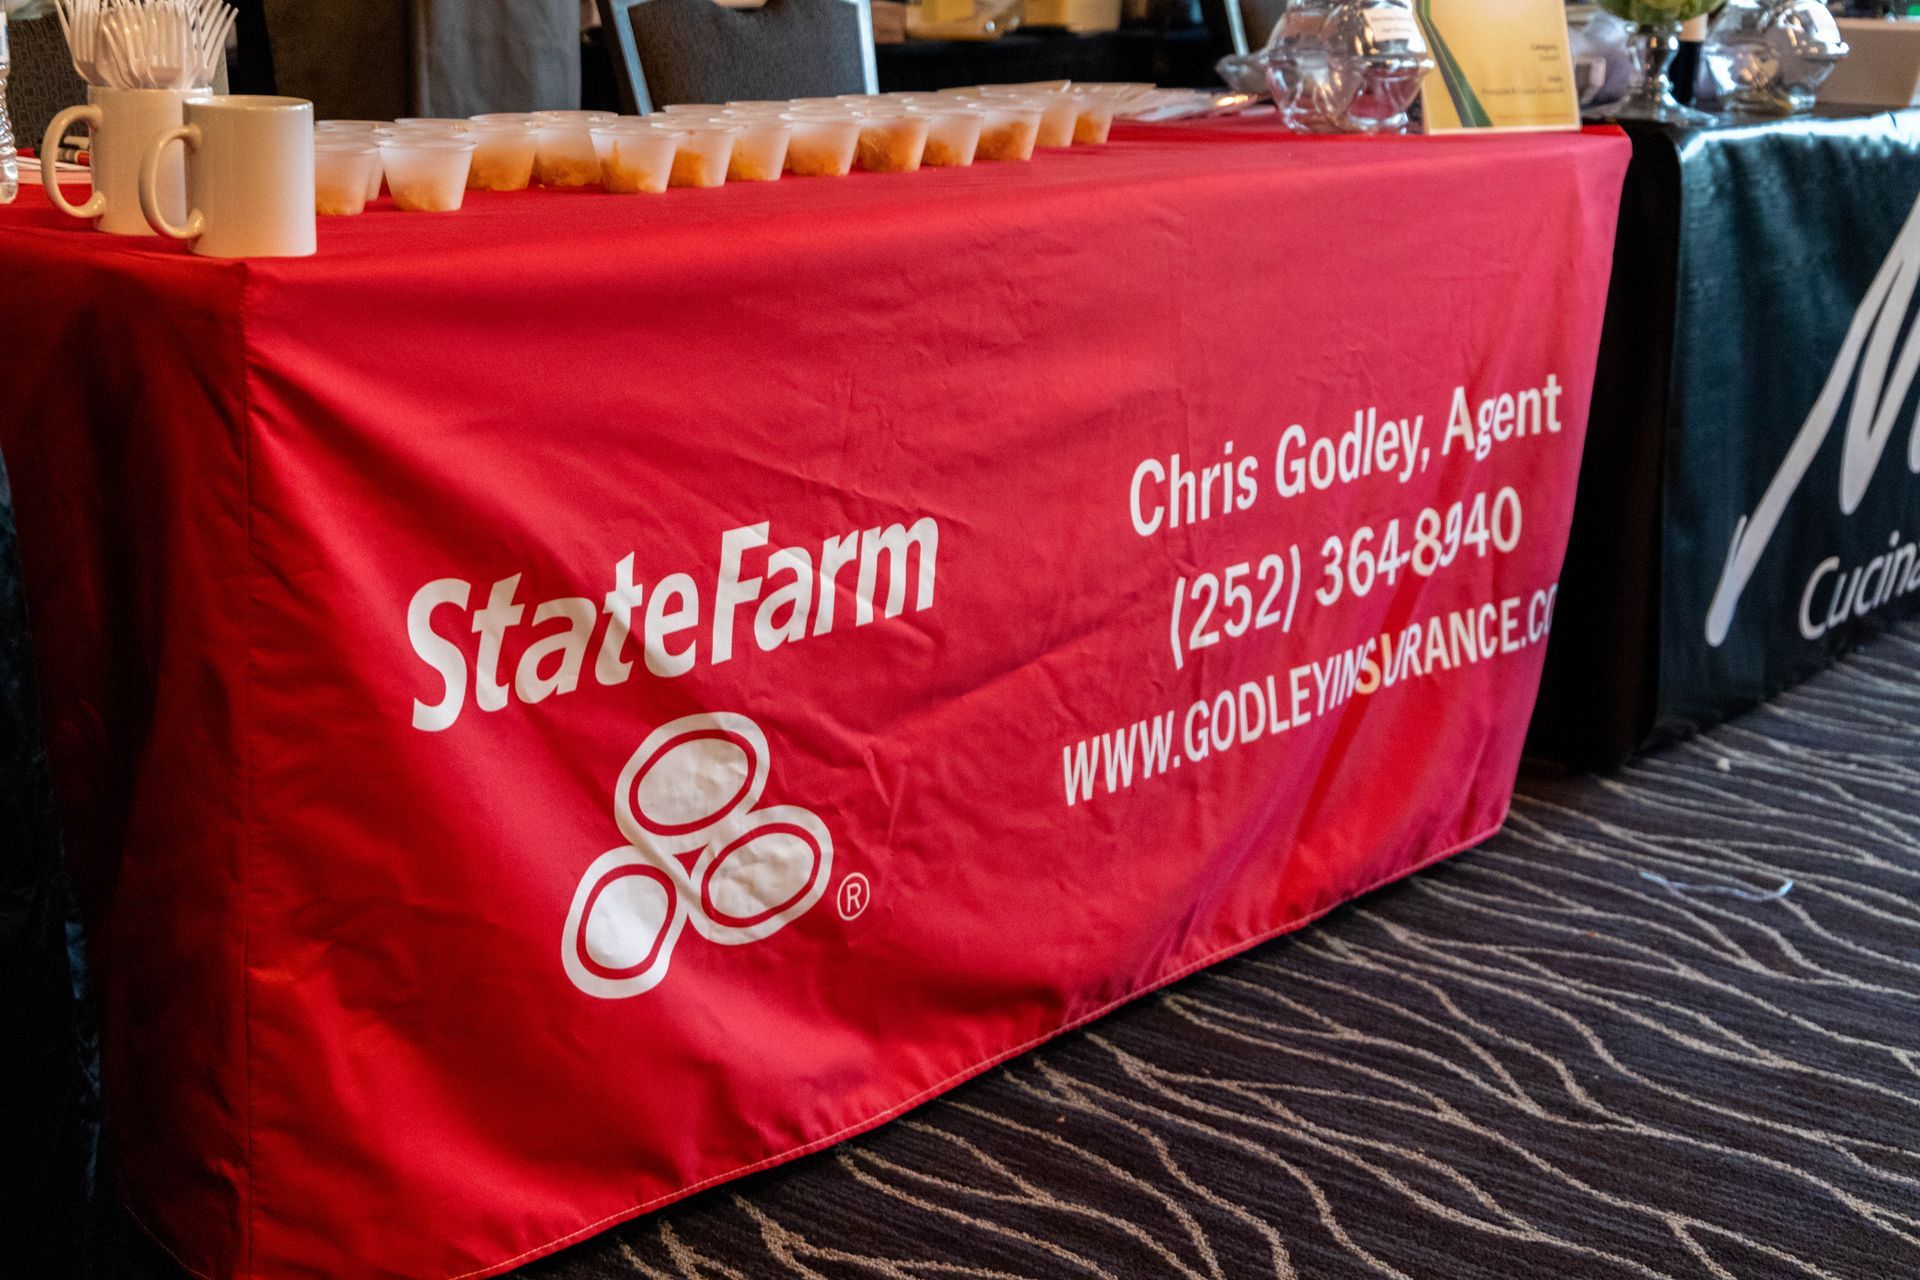 a red table cloth with state farm written on it